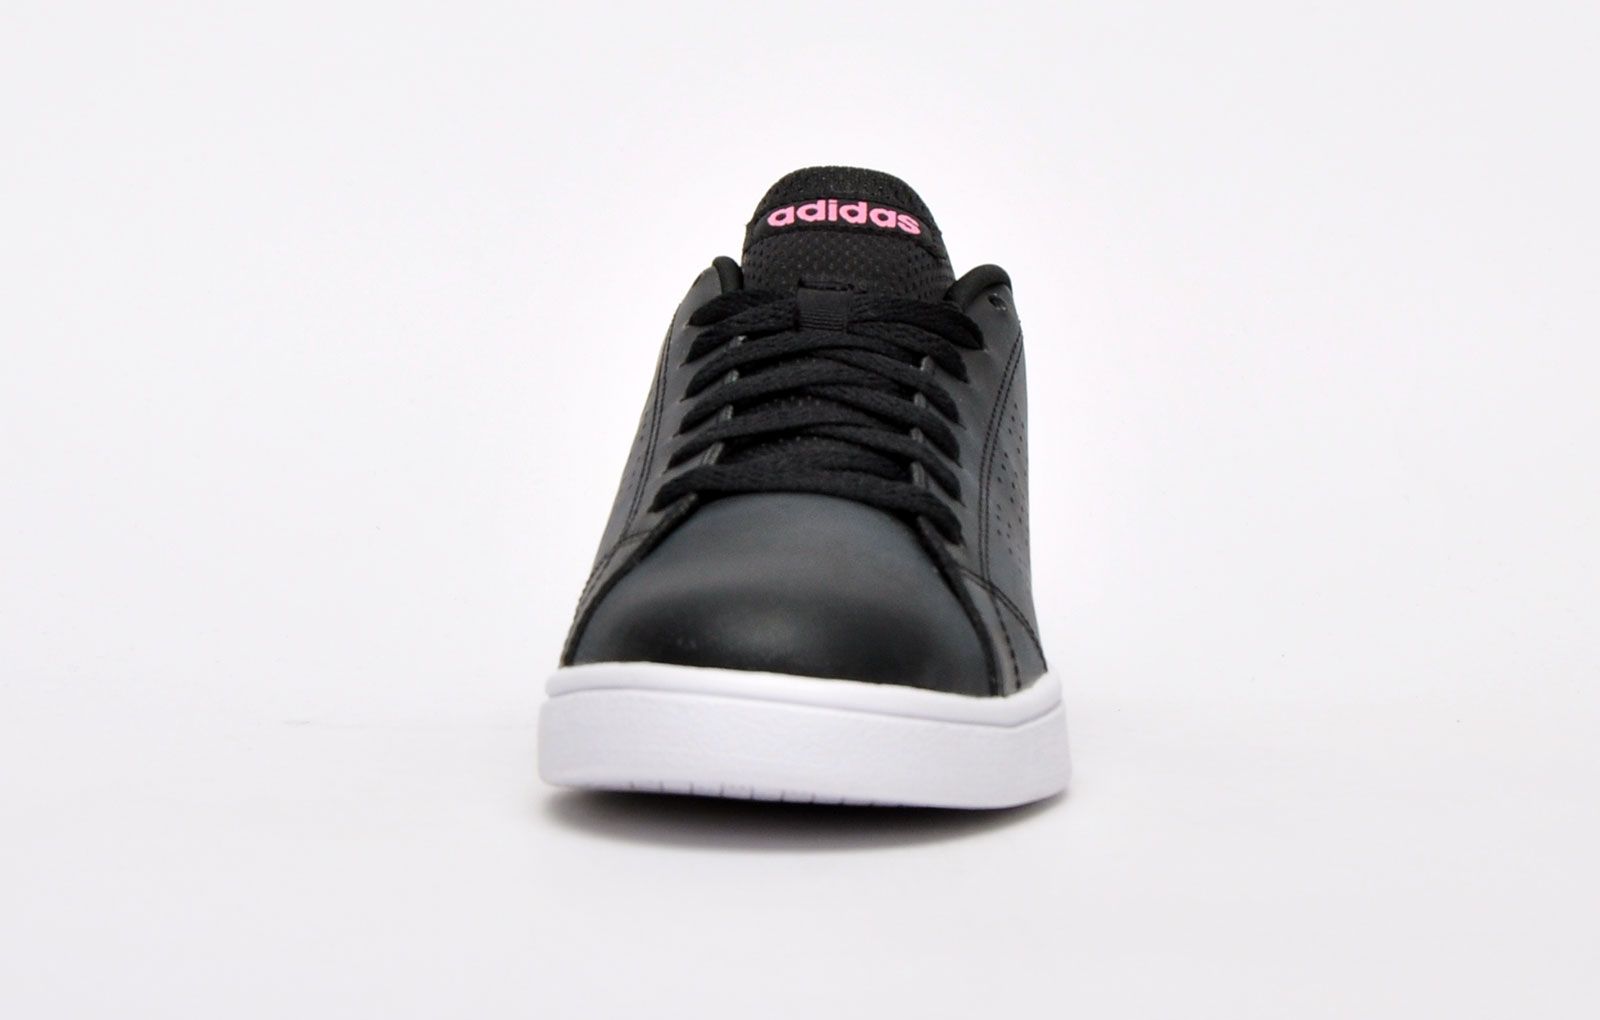 These Adidas Advantage womens trainers boast a low-profile lightweight silhouette with a smooth synthetic upper with tonal stitching and perforated detailing to the sides with a striped heel tab making these lifestyle trainers ideal for everyday wear 
 The Advantage VS displays great wear without sacrificing style and durability with a combination of a lace fastening front with a padded ankle collar and cushioned insole providing a secure and comfortable fit, completed with the adidas branding to the tongue and sole to deliver an iconic look and instant brand recognition
 - Synthetic upper
 - Perforated 3-Stripes
 - Padded heel and ankle collar
 - Comfortable textile lining
 - Heel tab for easy on off 
 - Adidas branding throughout
 Please Note: 
These Adidas trainers are sold as B grades which means there may be some very slight cosmetic issues on the shoe and they come in a white Adidas box with on most occasions the Adidas brand authenticity details attached to them. There could occasional issues with wrong swing tags being allocated to wrong shoes by Adidas themselves which could result in some size confusion but you must take the size IN THE SHOE as the size that the shoe actually is ( not what is on the tag ). We have checked most of the shoes and in our opinion, all are practically perfect without any blemishes on them at all and in essence if the shoes did not have the letter B denoted on the swing tag you would presume these were perfect shoes. All shoes are guaranteed against fair wear and tear and offer a substantial saving against the normal high street price. The overall function or performance of the shoe will not be affected by any minor cosmetic issues. B Grades are original authentic products released by the brand manufacturer with their approval at greatly reduced prices. If you are unhappy with your purchase, we will be more than happy to take the shoes back from you and issue a full refund.